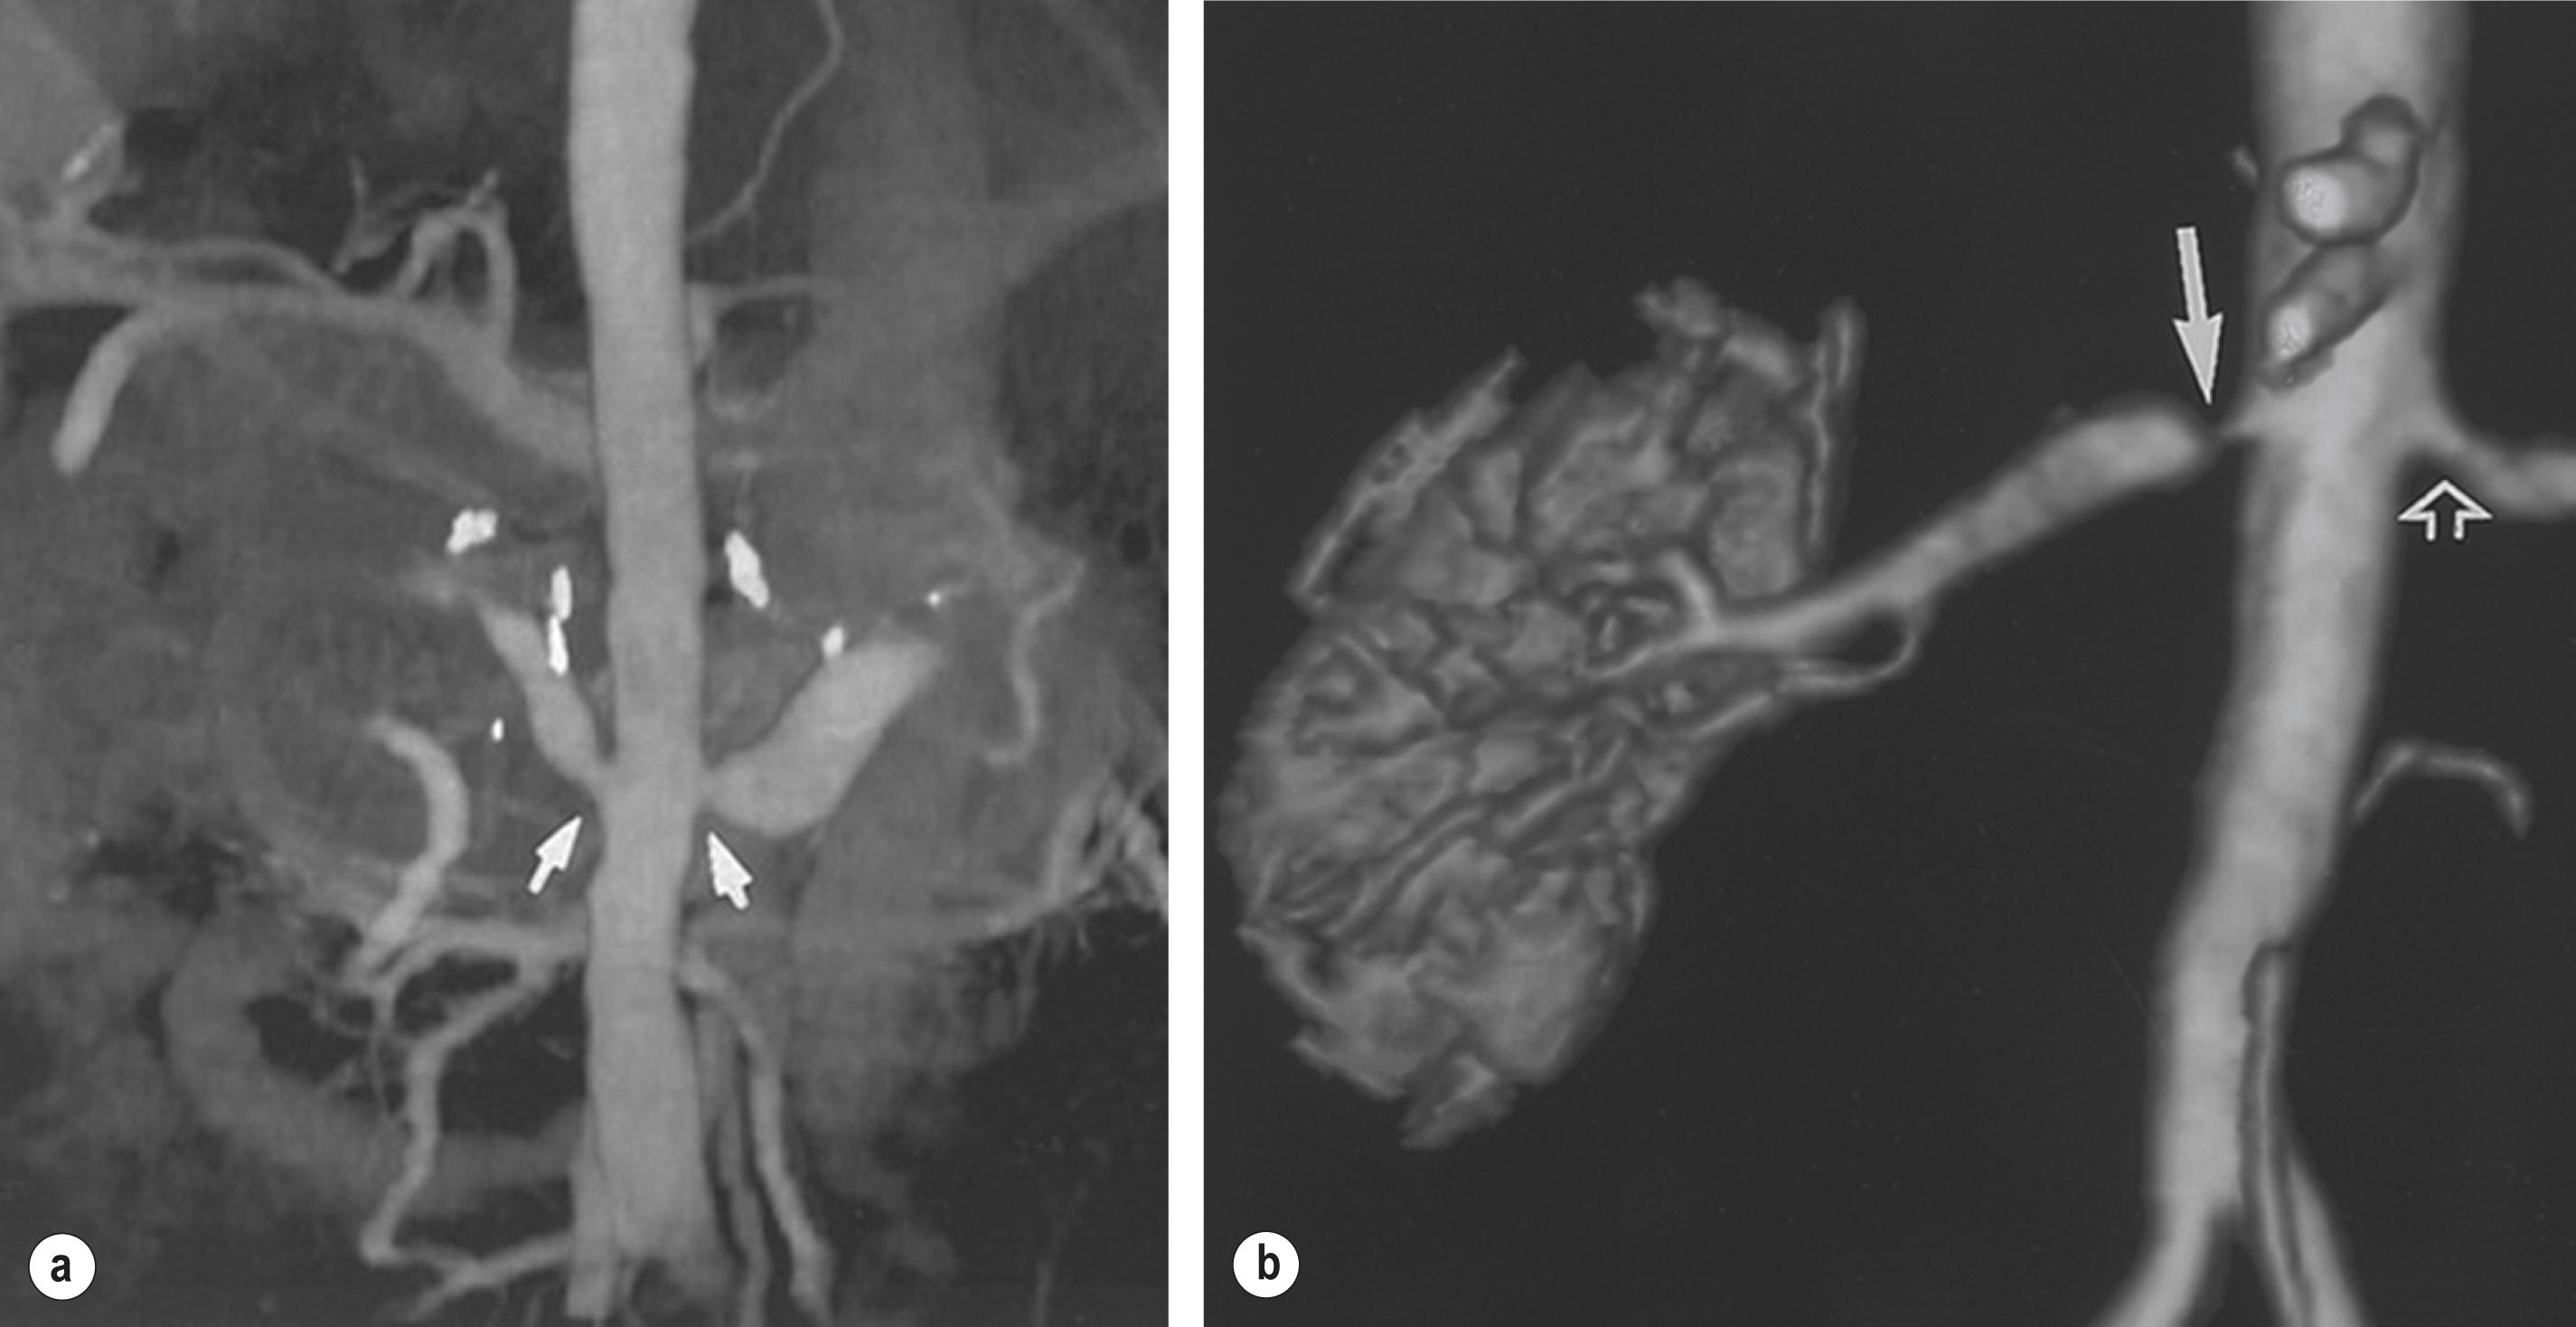 Figure 15.1, Bilateral renal artery stenosis. (a) Computed tomography; (b) Magnetic resonance angiography.